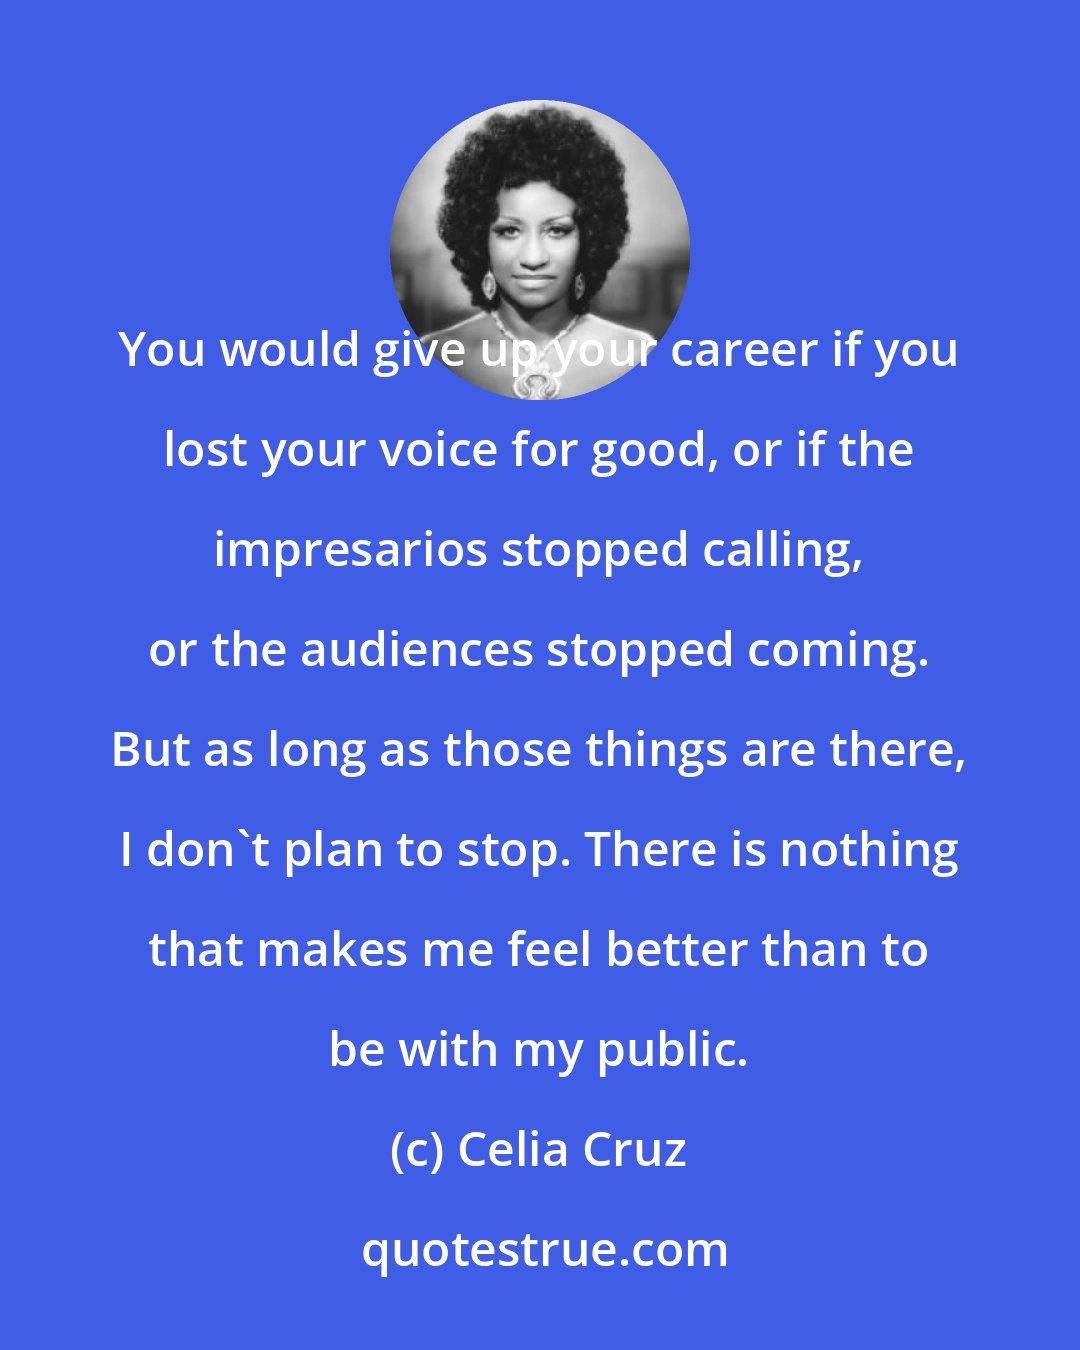 Celia Cruz: You would give up your career if you lost your voice for good, or if the impresarios stopped calling, or the audiences stopped coming. But as long as those things are there, I don't plan to stop. There is nothing that makes me feel better than to be with my public.